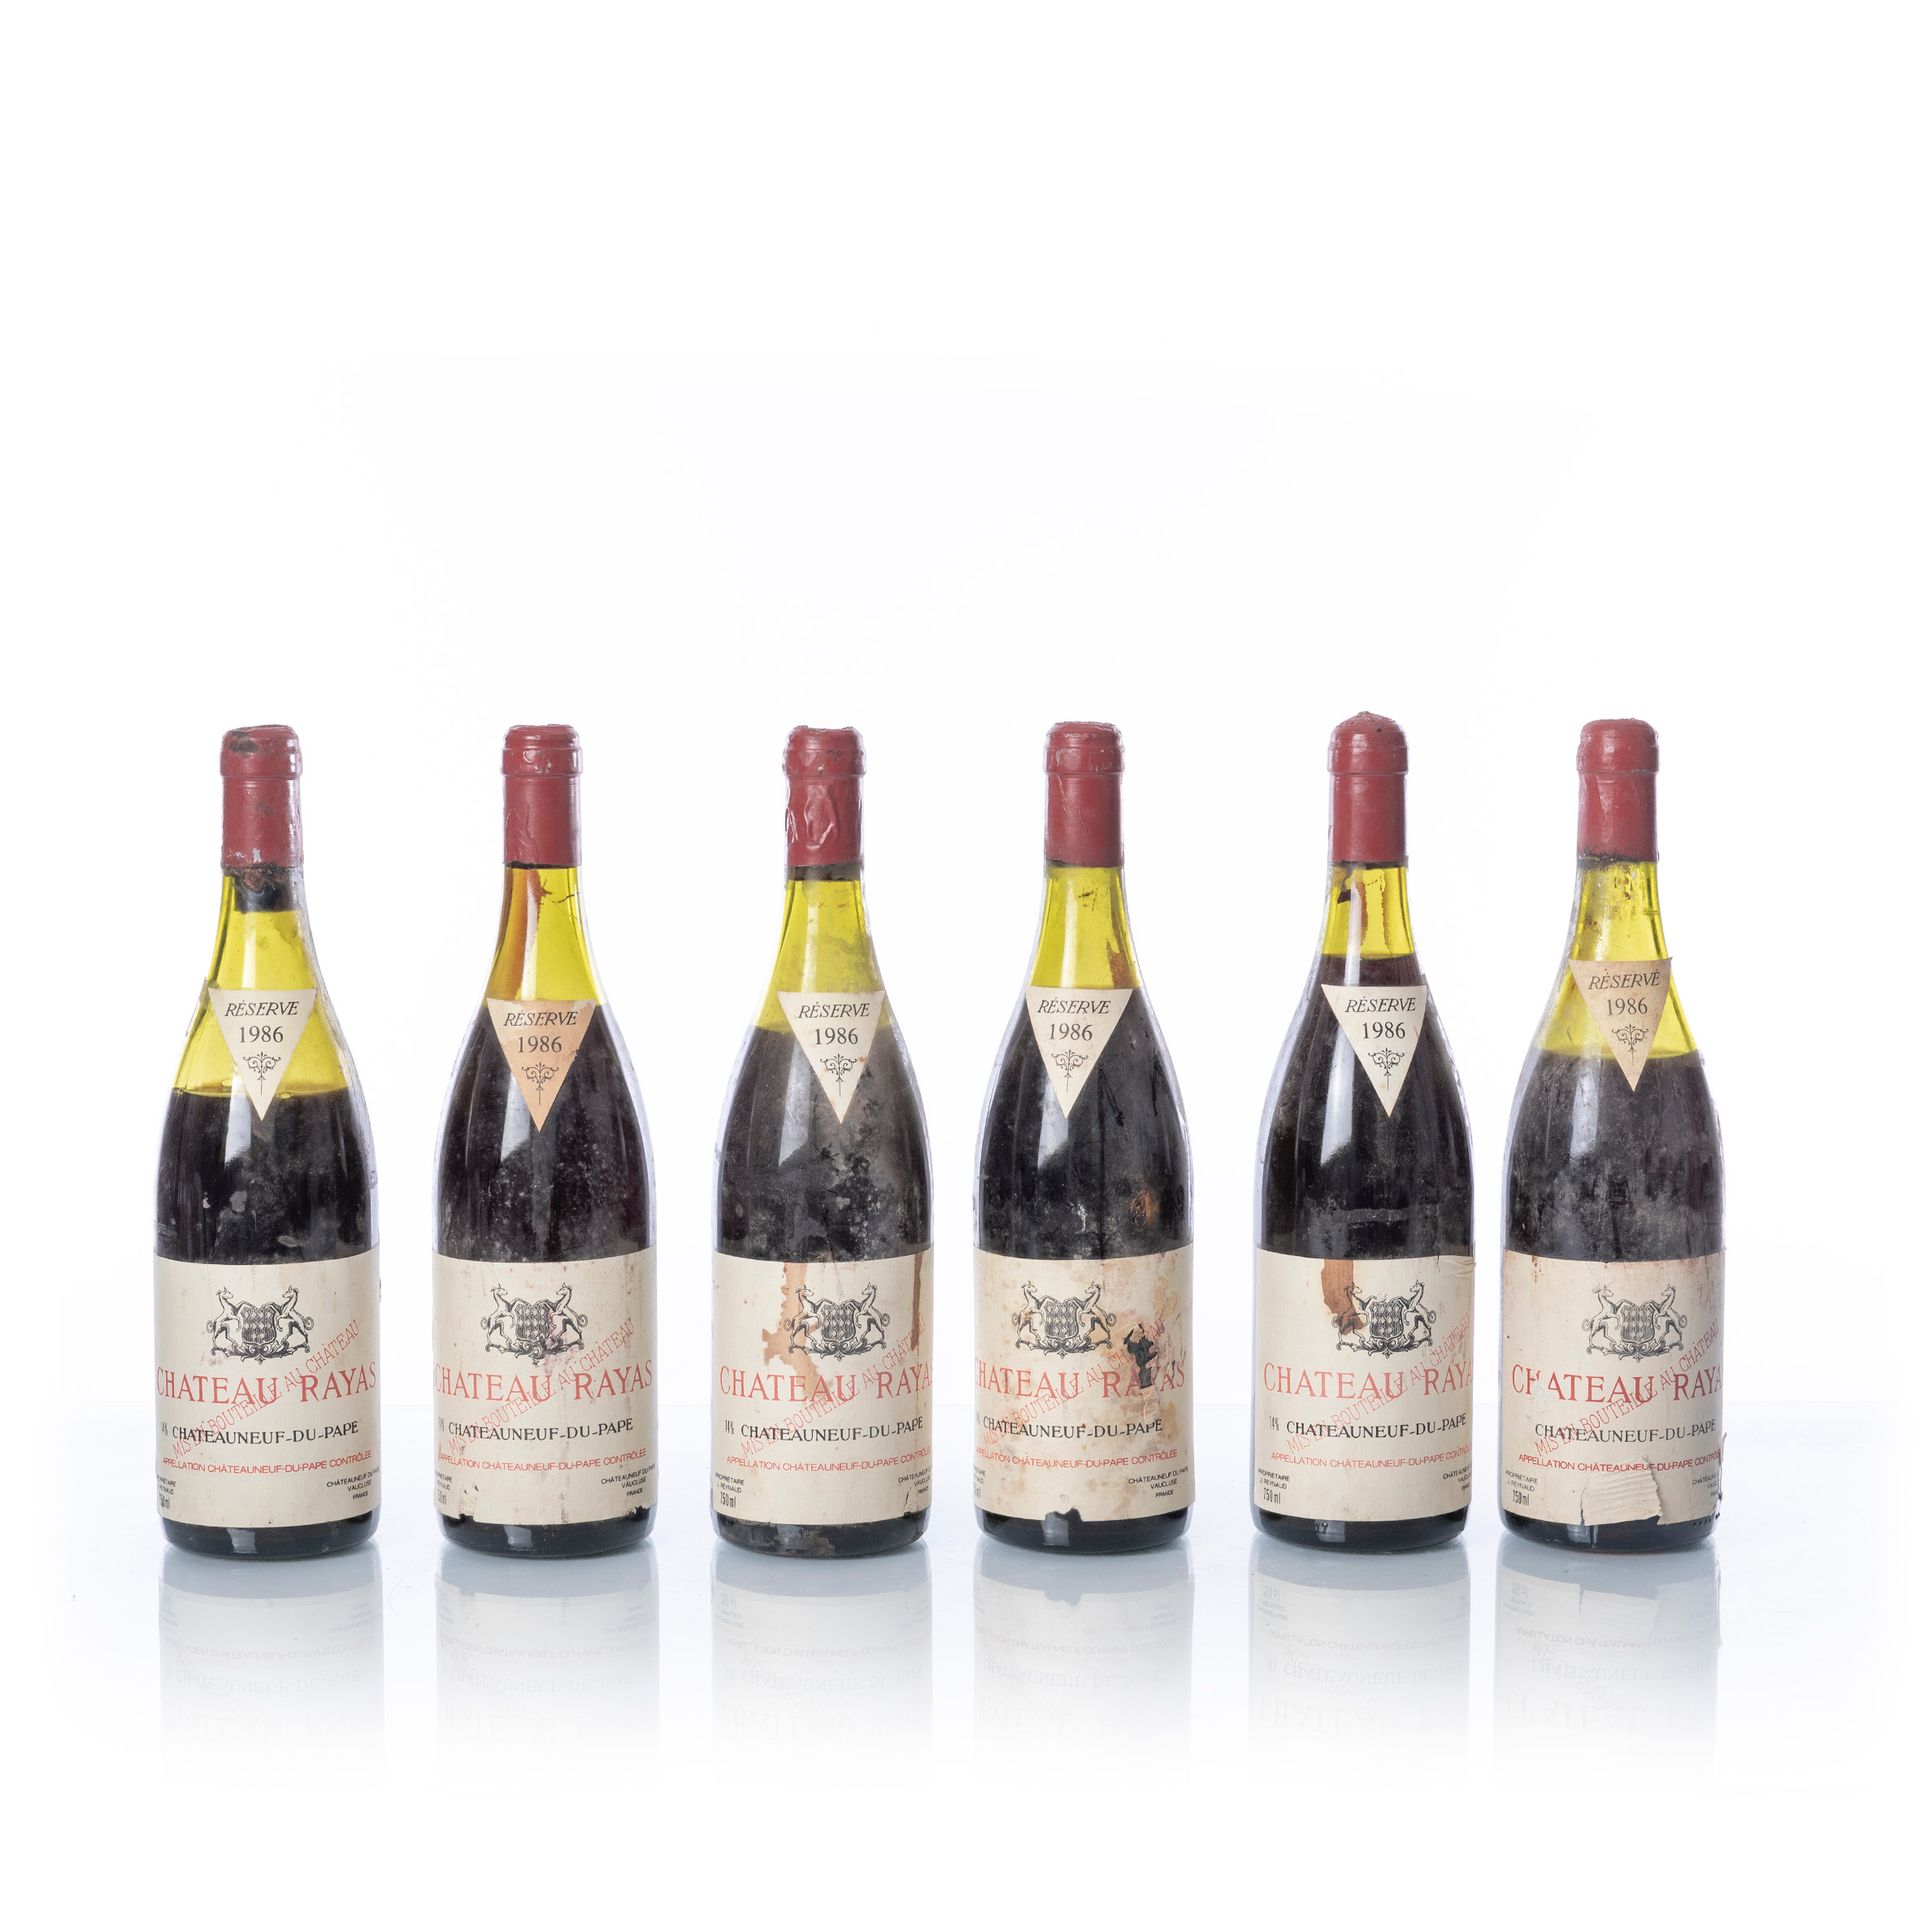 Null 6瓶 CHÂTEAUNEUF-DU-PAPE

年份：1986年

酒庄名称：RAYAS - Jacques REYNAUD酒庄

备注：（在3.2和&hellip;